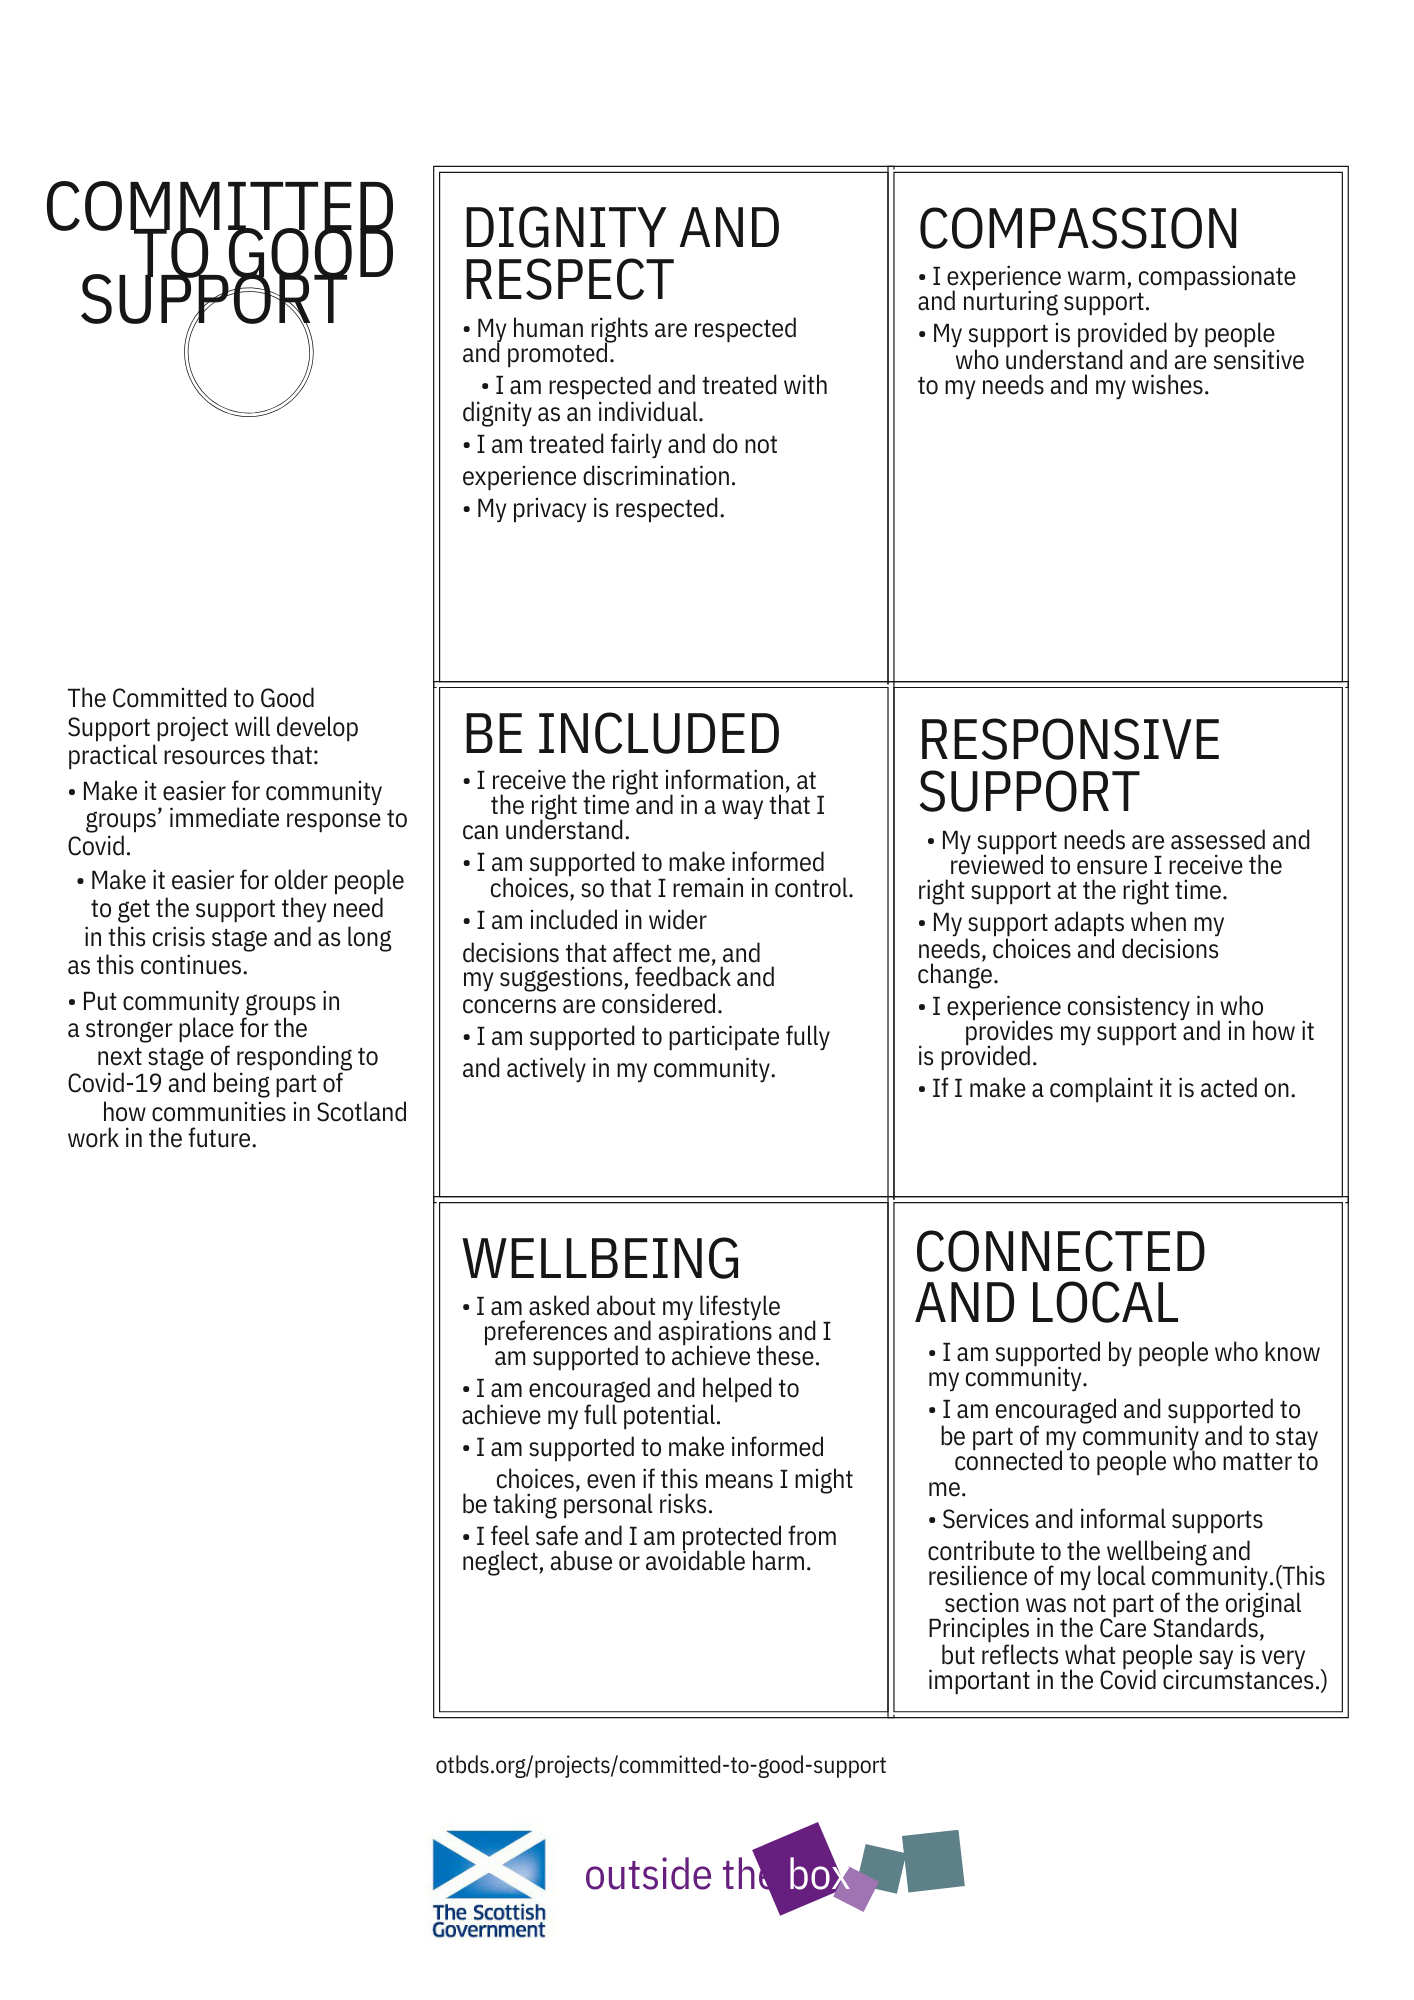 Screenshot of the Committed to Good Support principles resource